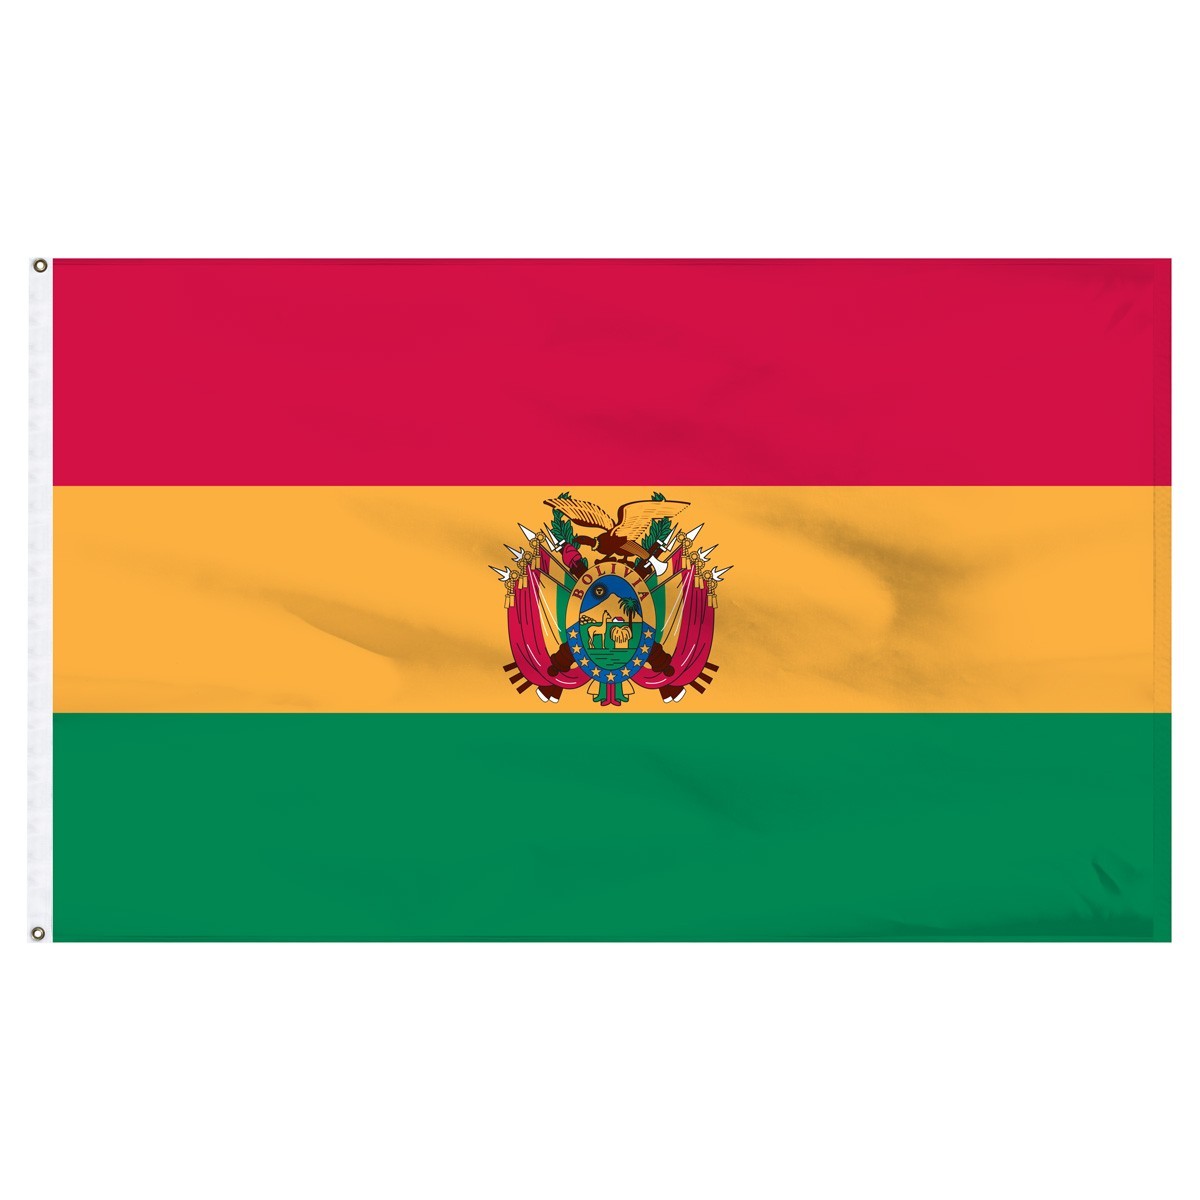 Shop international flags for sale., Bolivia high quality made in us. Shop 1-800 Flags